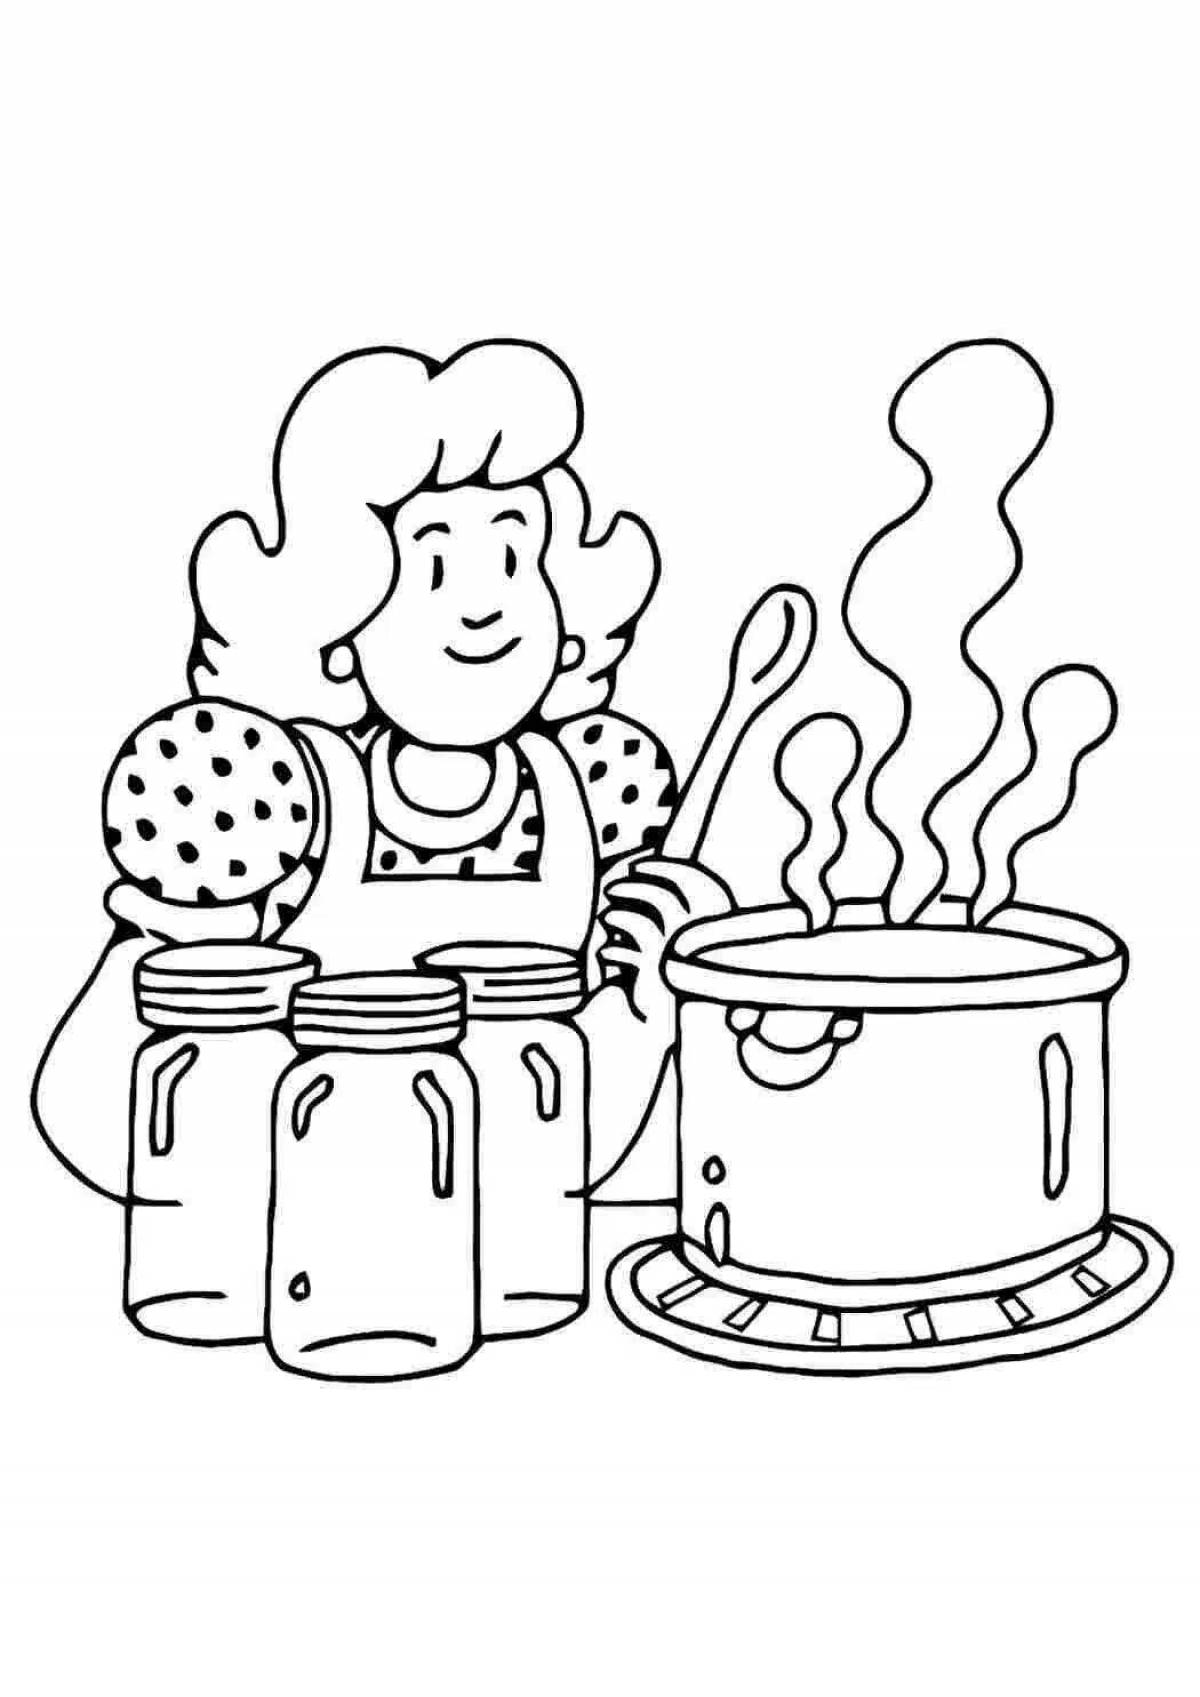 Colorful fire friend coloring page